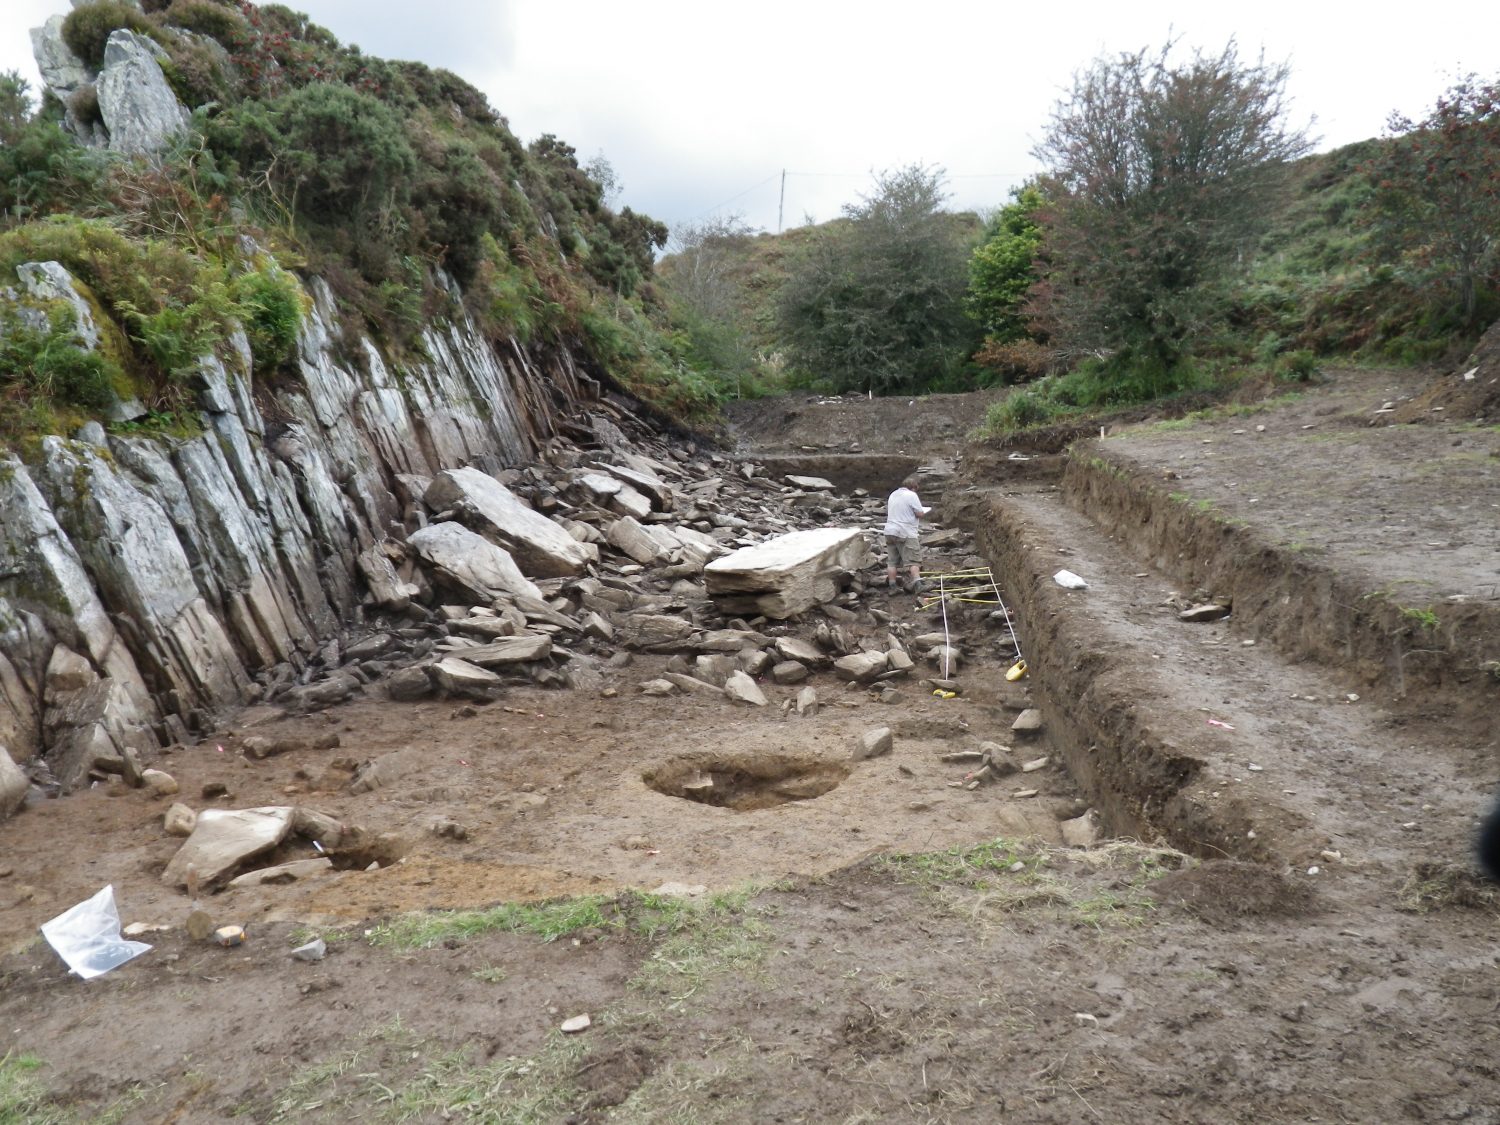 Archaeological excavation at Craig Rhosyfelin in the Preseli Hills